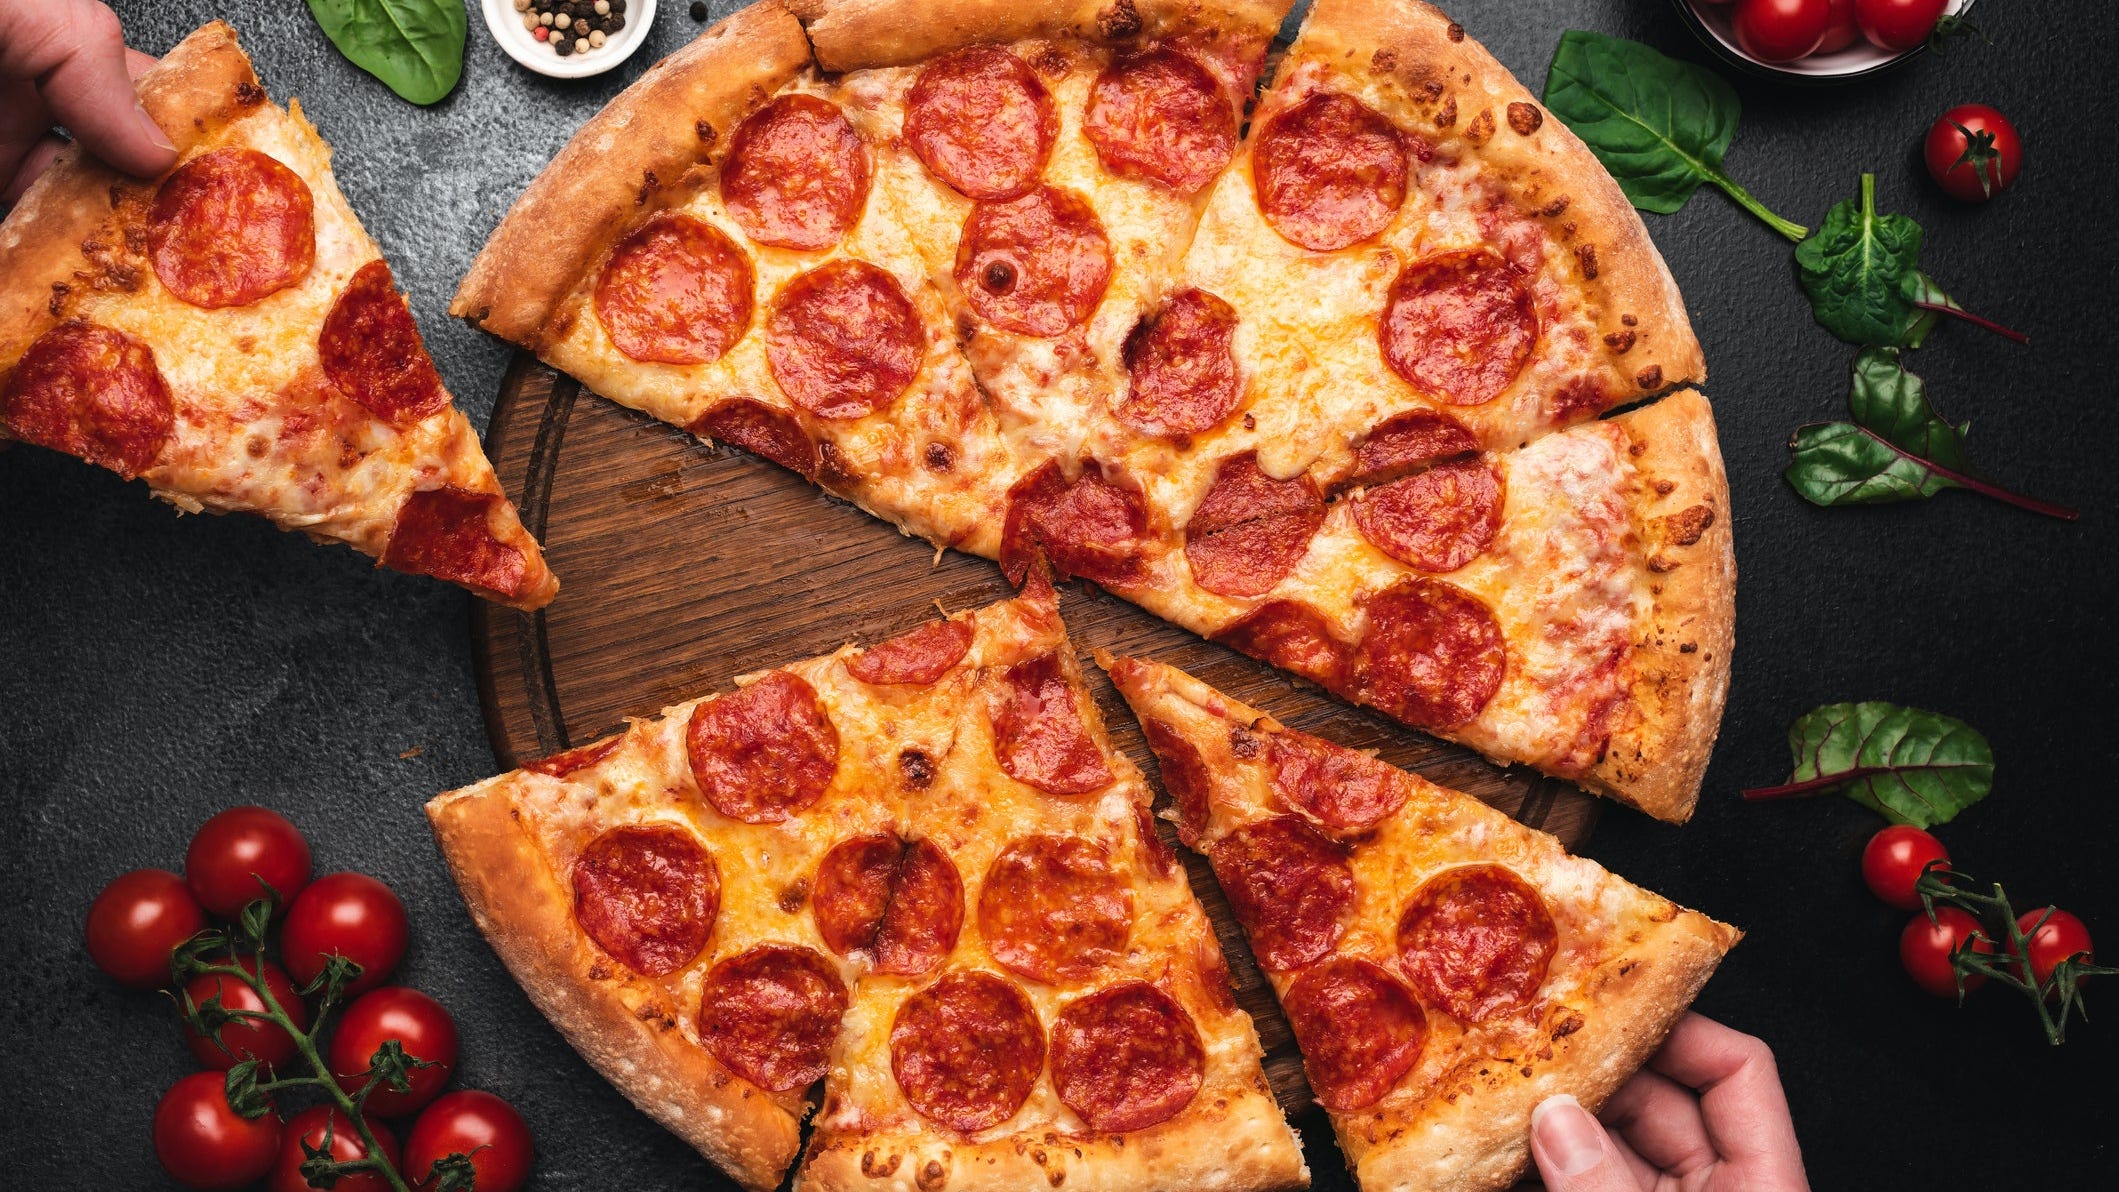 National Pi Day 2023 deals near me Score discounts on pizza